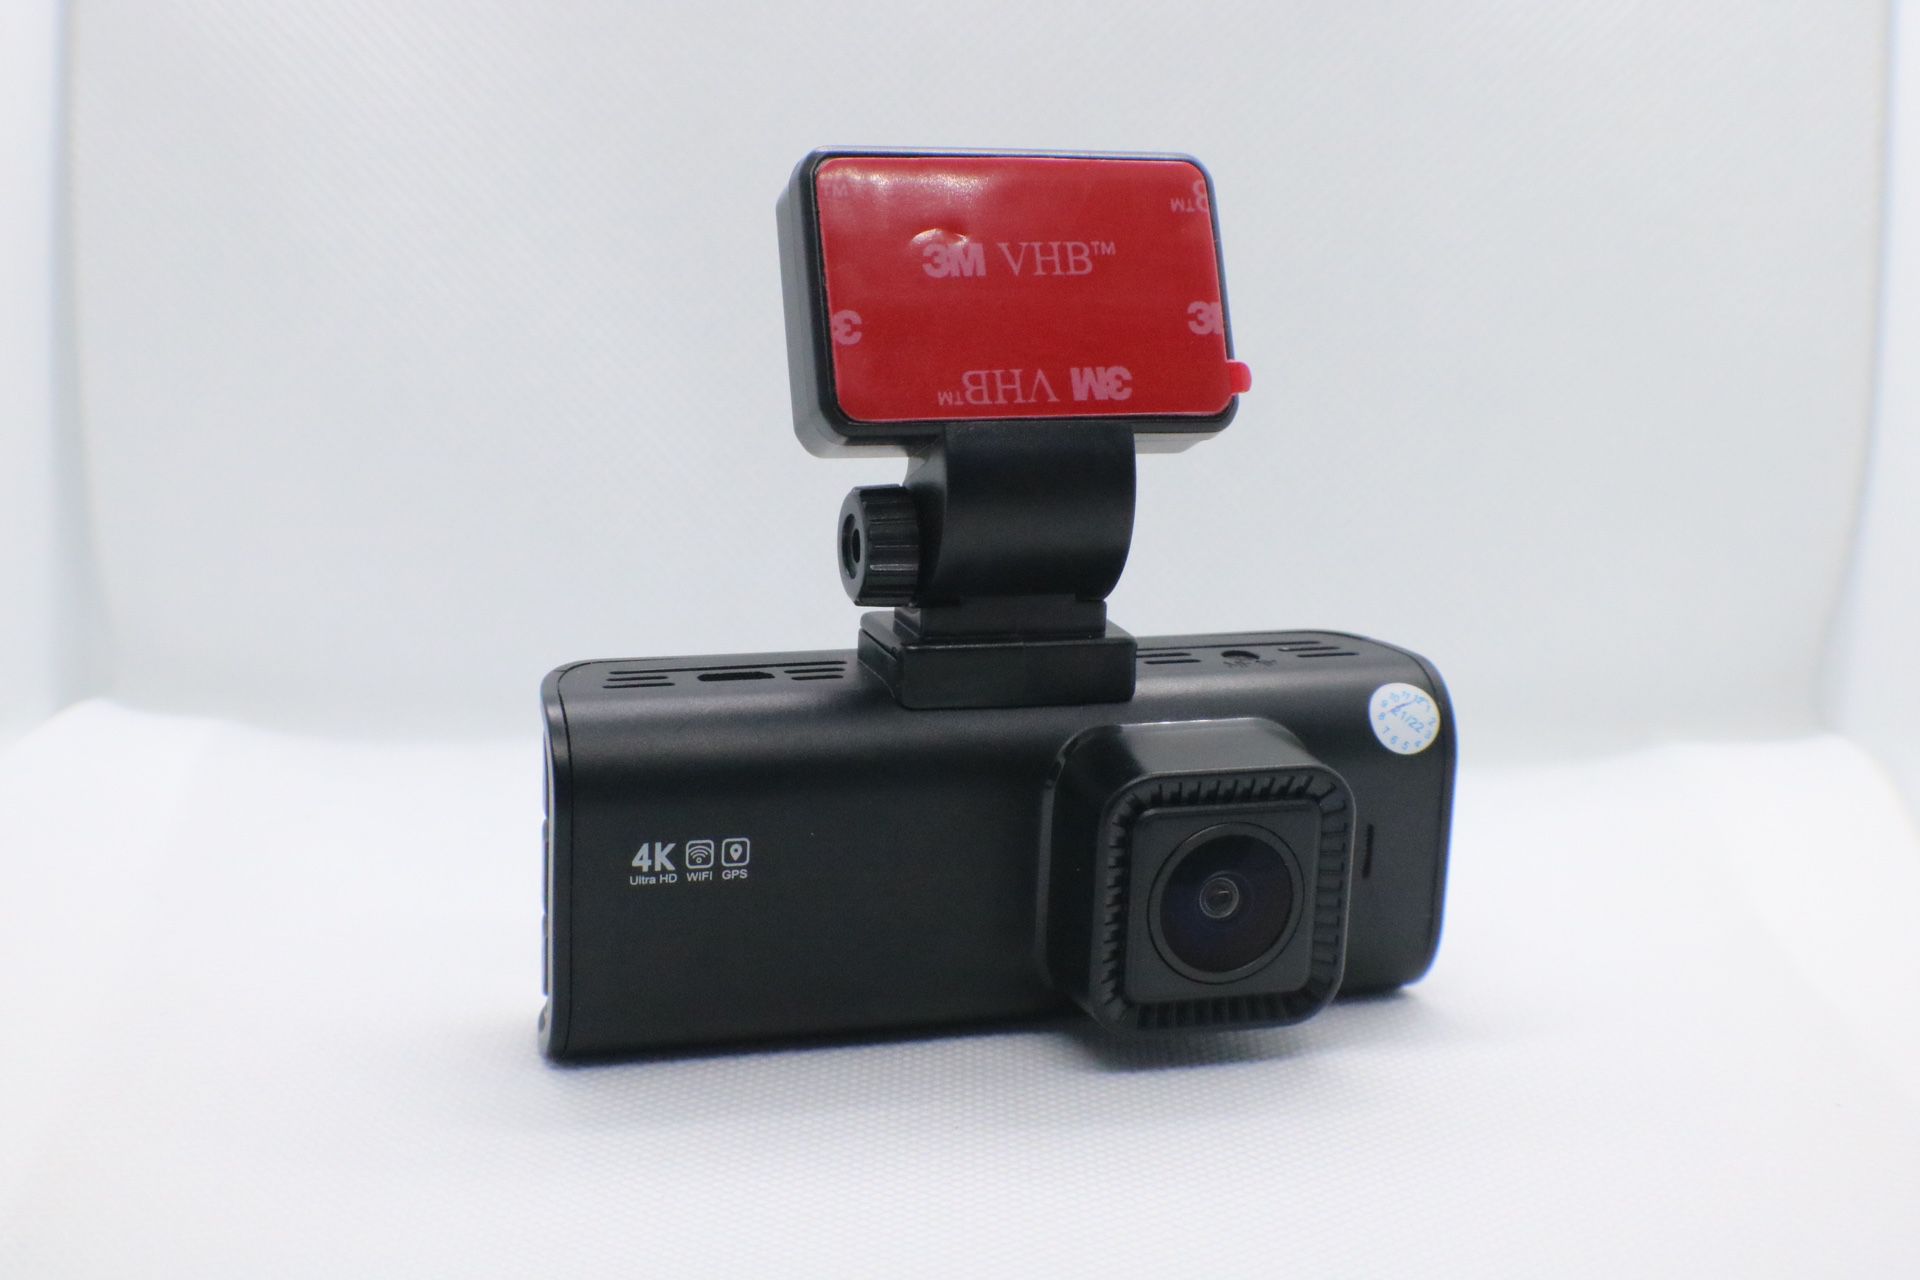 Rove R2-4K Dash Cam - general for sale - by owner - craigslist